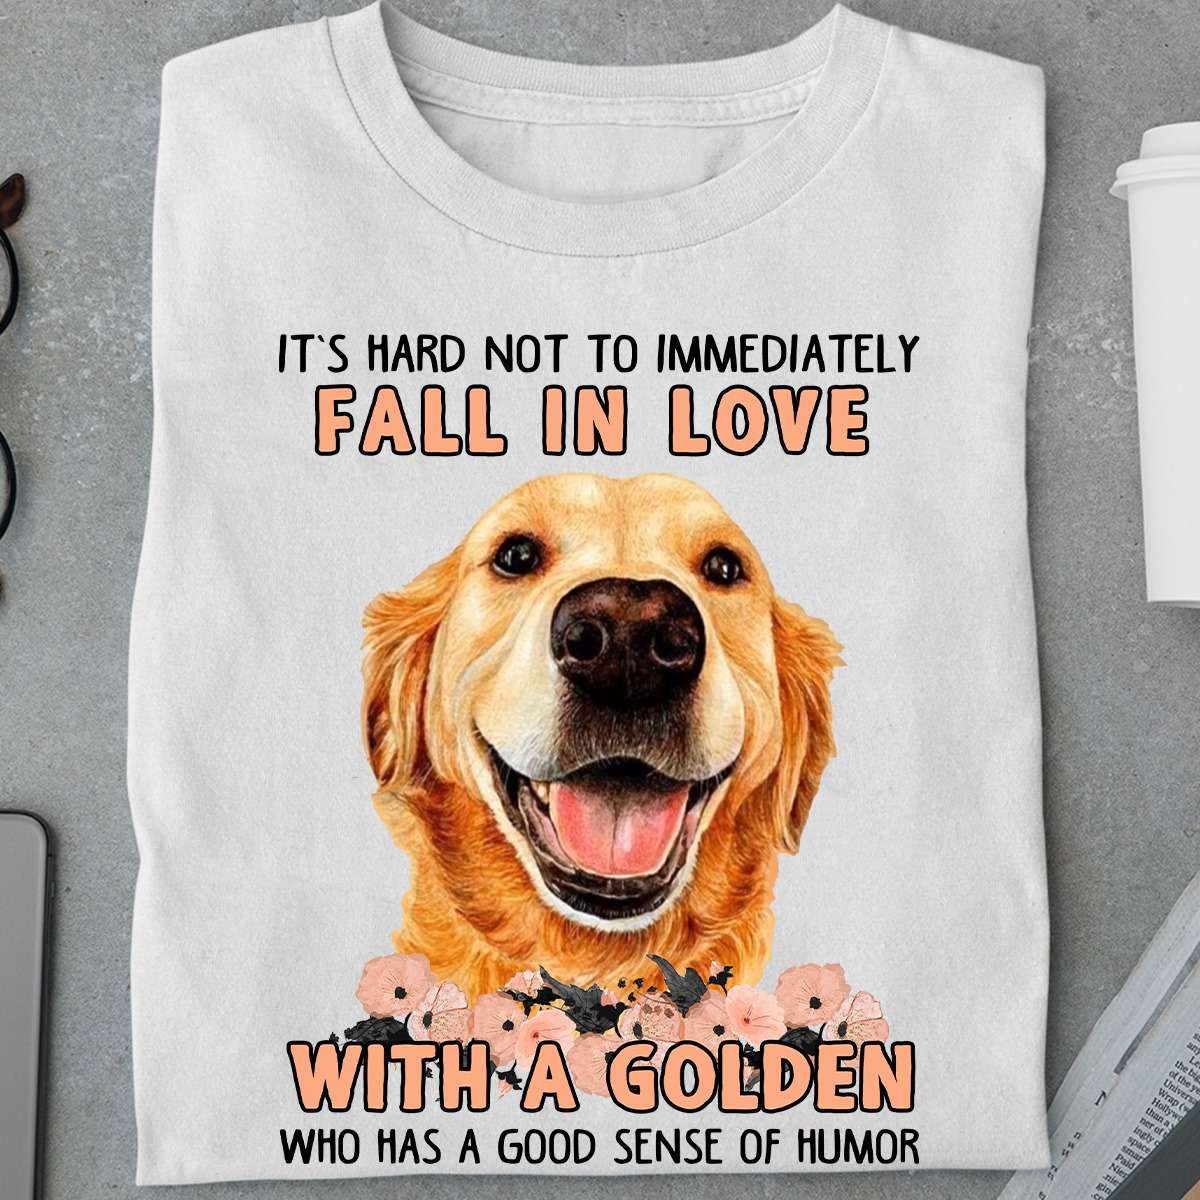 Golden Retriever Dog - It's hard not to immediately fall in love with a golden who has a good sense of humor